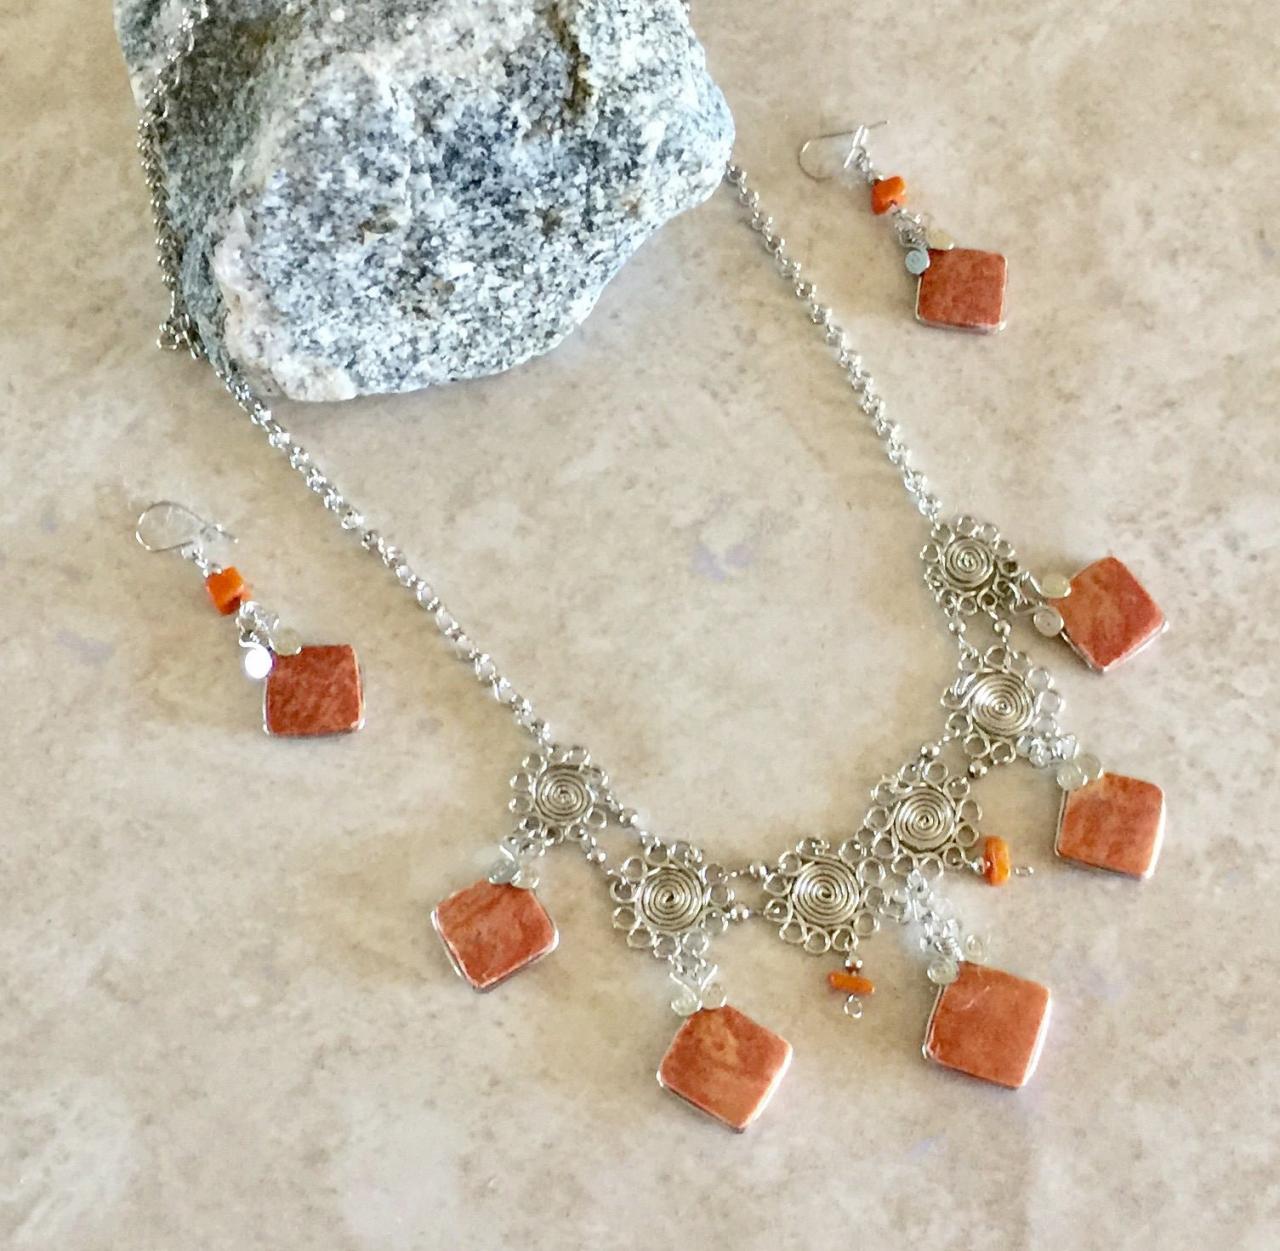 Red Jasper Necklace and Earrings, Diamond Shape Necklace, Geometric Necklace, Orange Necklace, Filigree Necklace, Chandelier Necklace